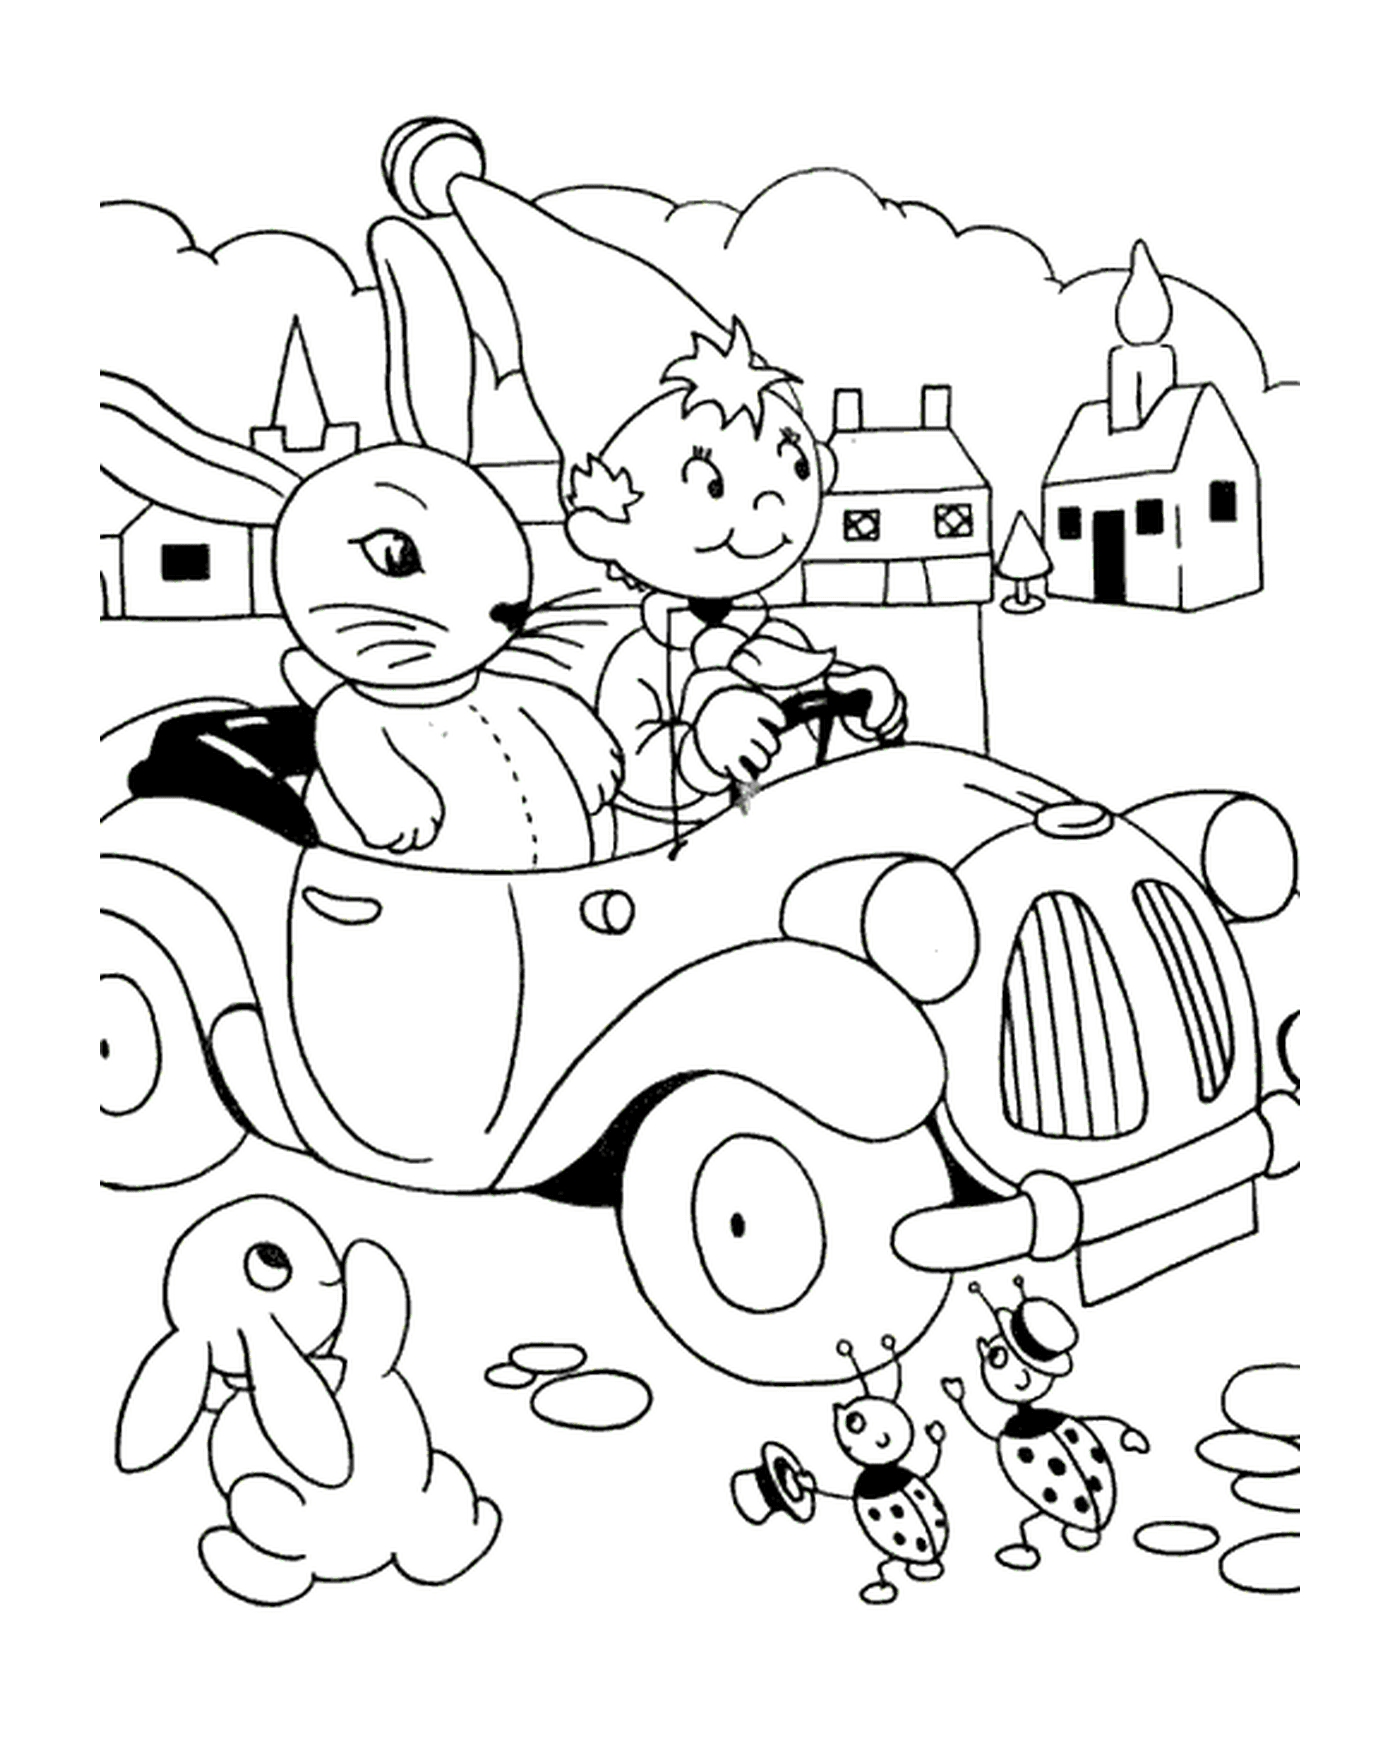  yes yes and rabbit in a car 